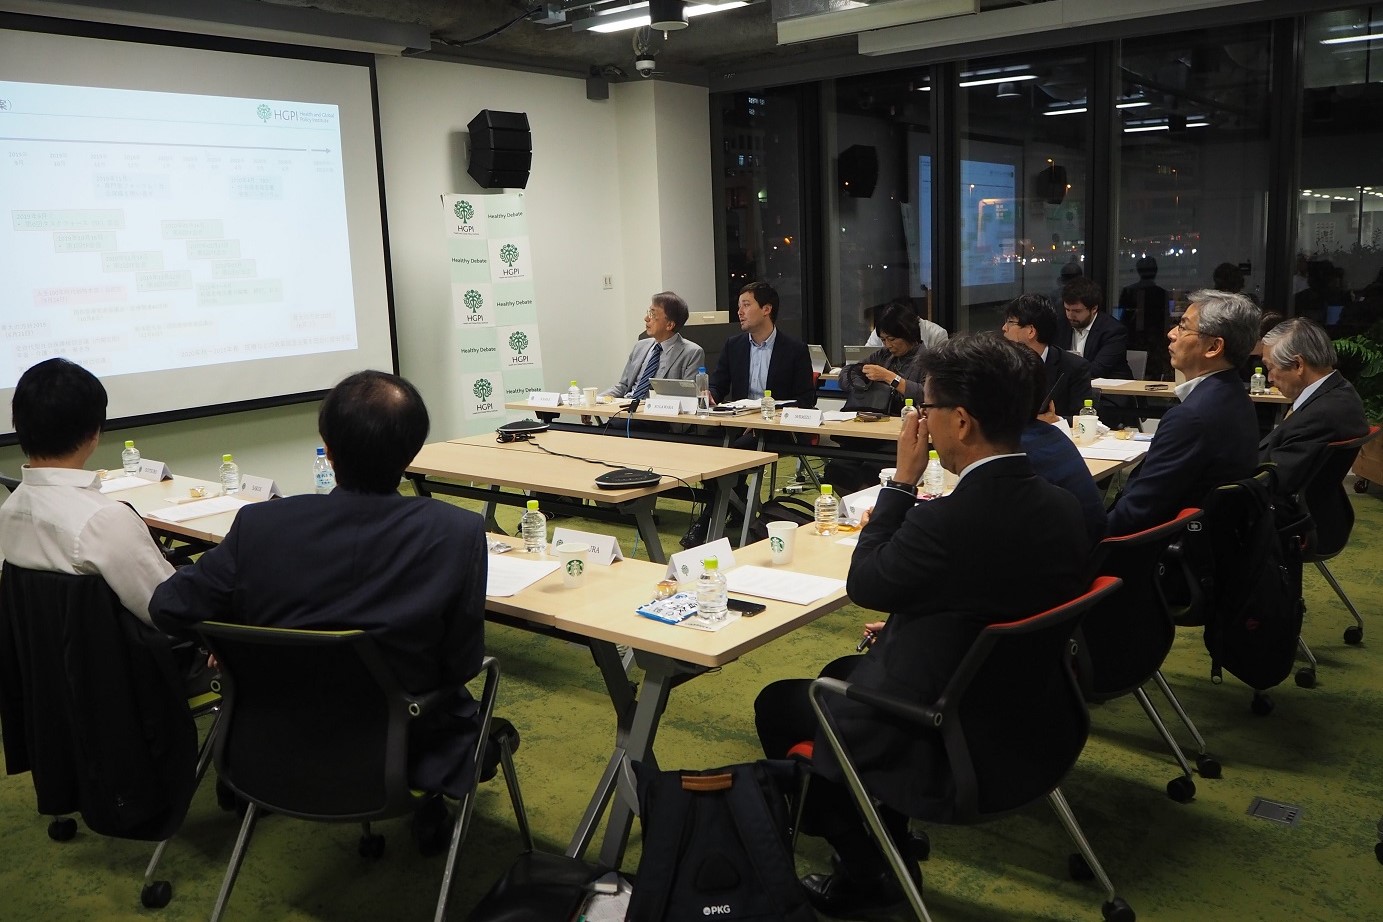 [Event Report] First Meeting of the “Rebalancing Healthcare Systems: Innovation and Sustainability” Taskforce: Measures to Increase Spending Efficiency (October 16, 2019)